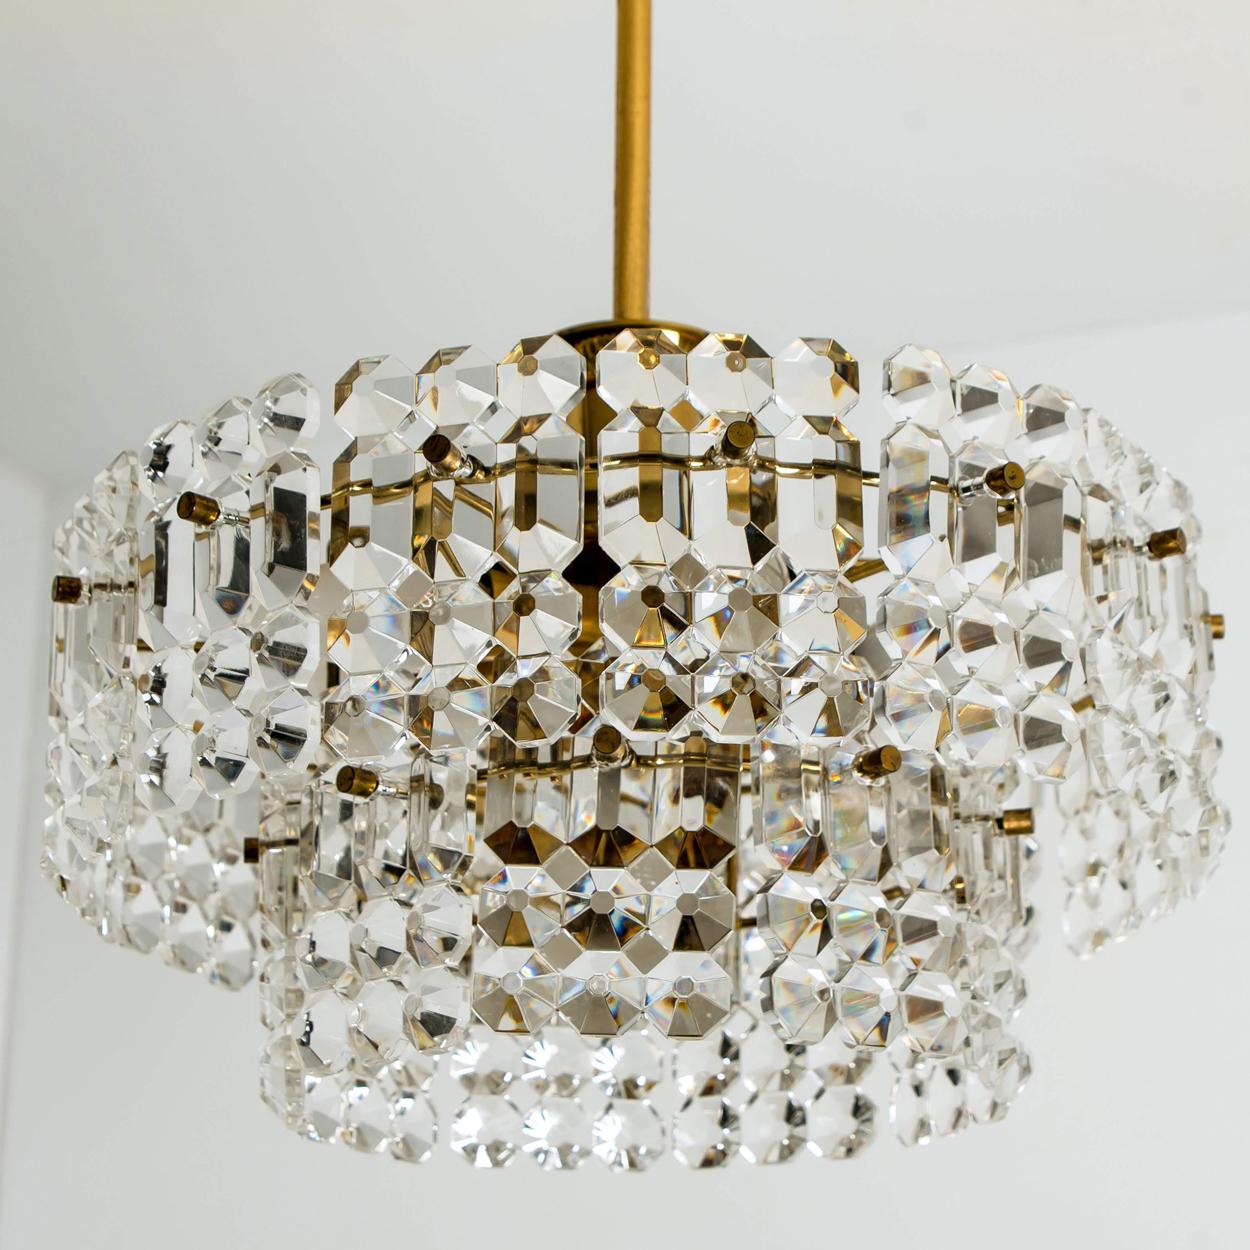 Pair of Gold-Plated Kinkeldey Crystal Glass Chandeliers, 1960s For Sale 9